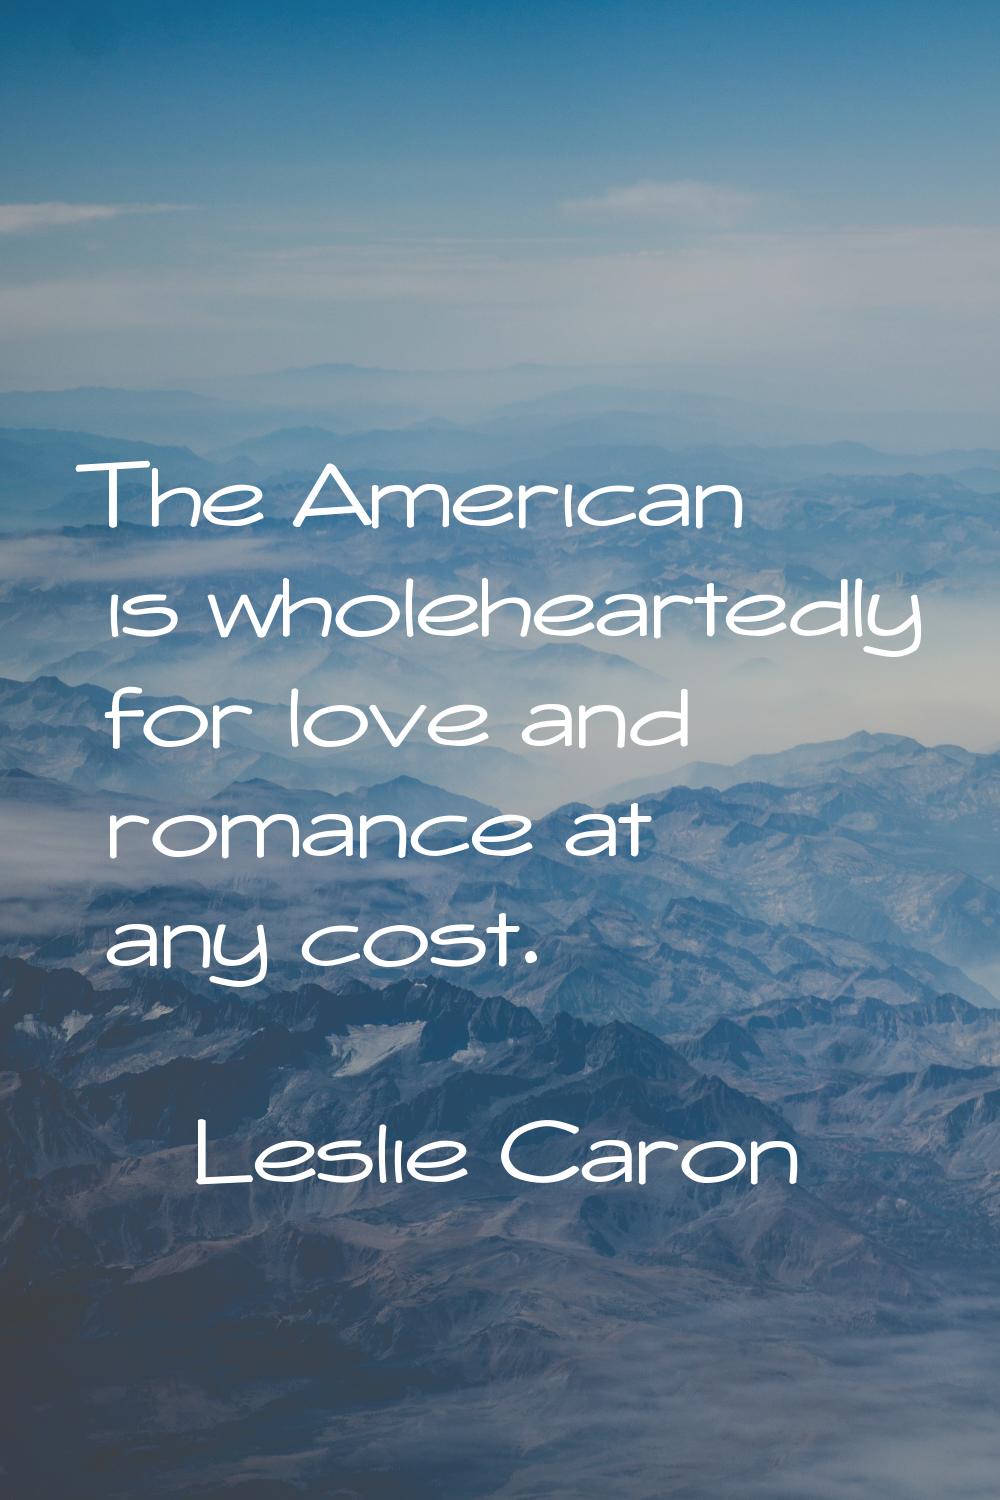 The American is wholeheartedly for love and romance at any cost.